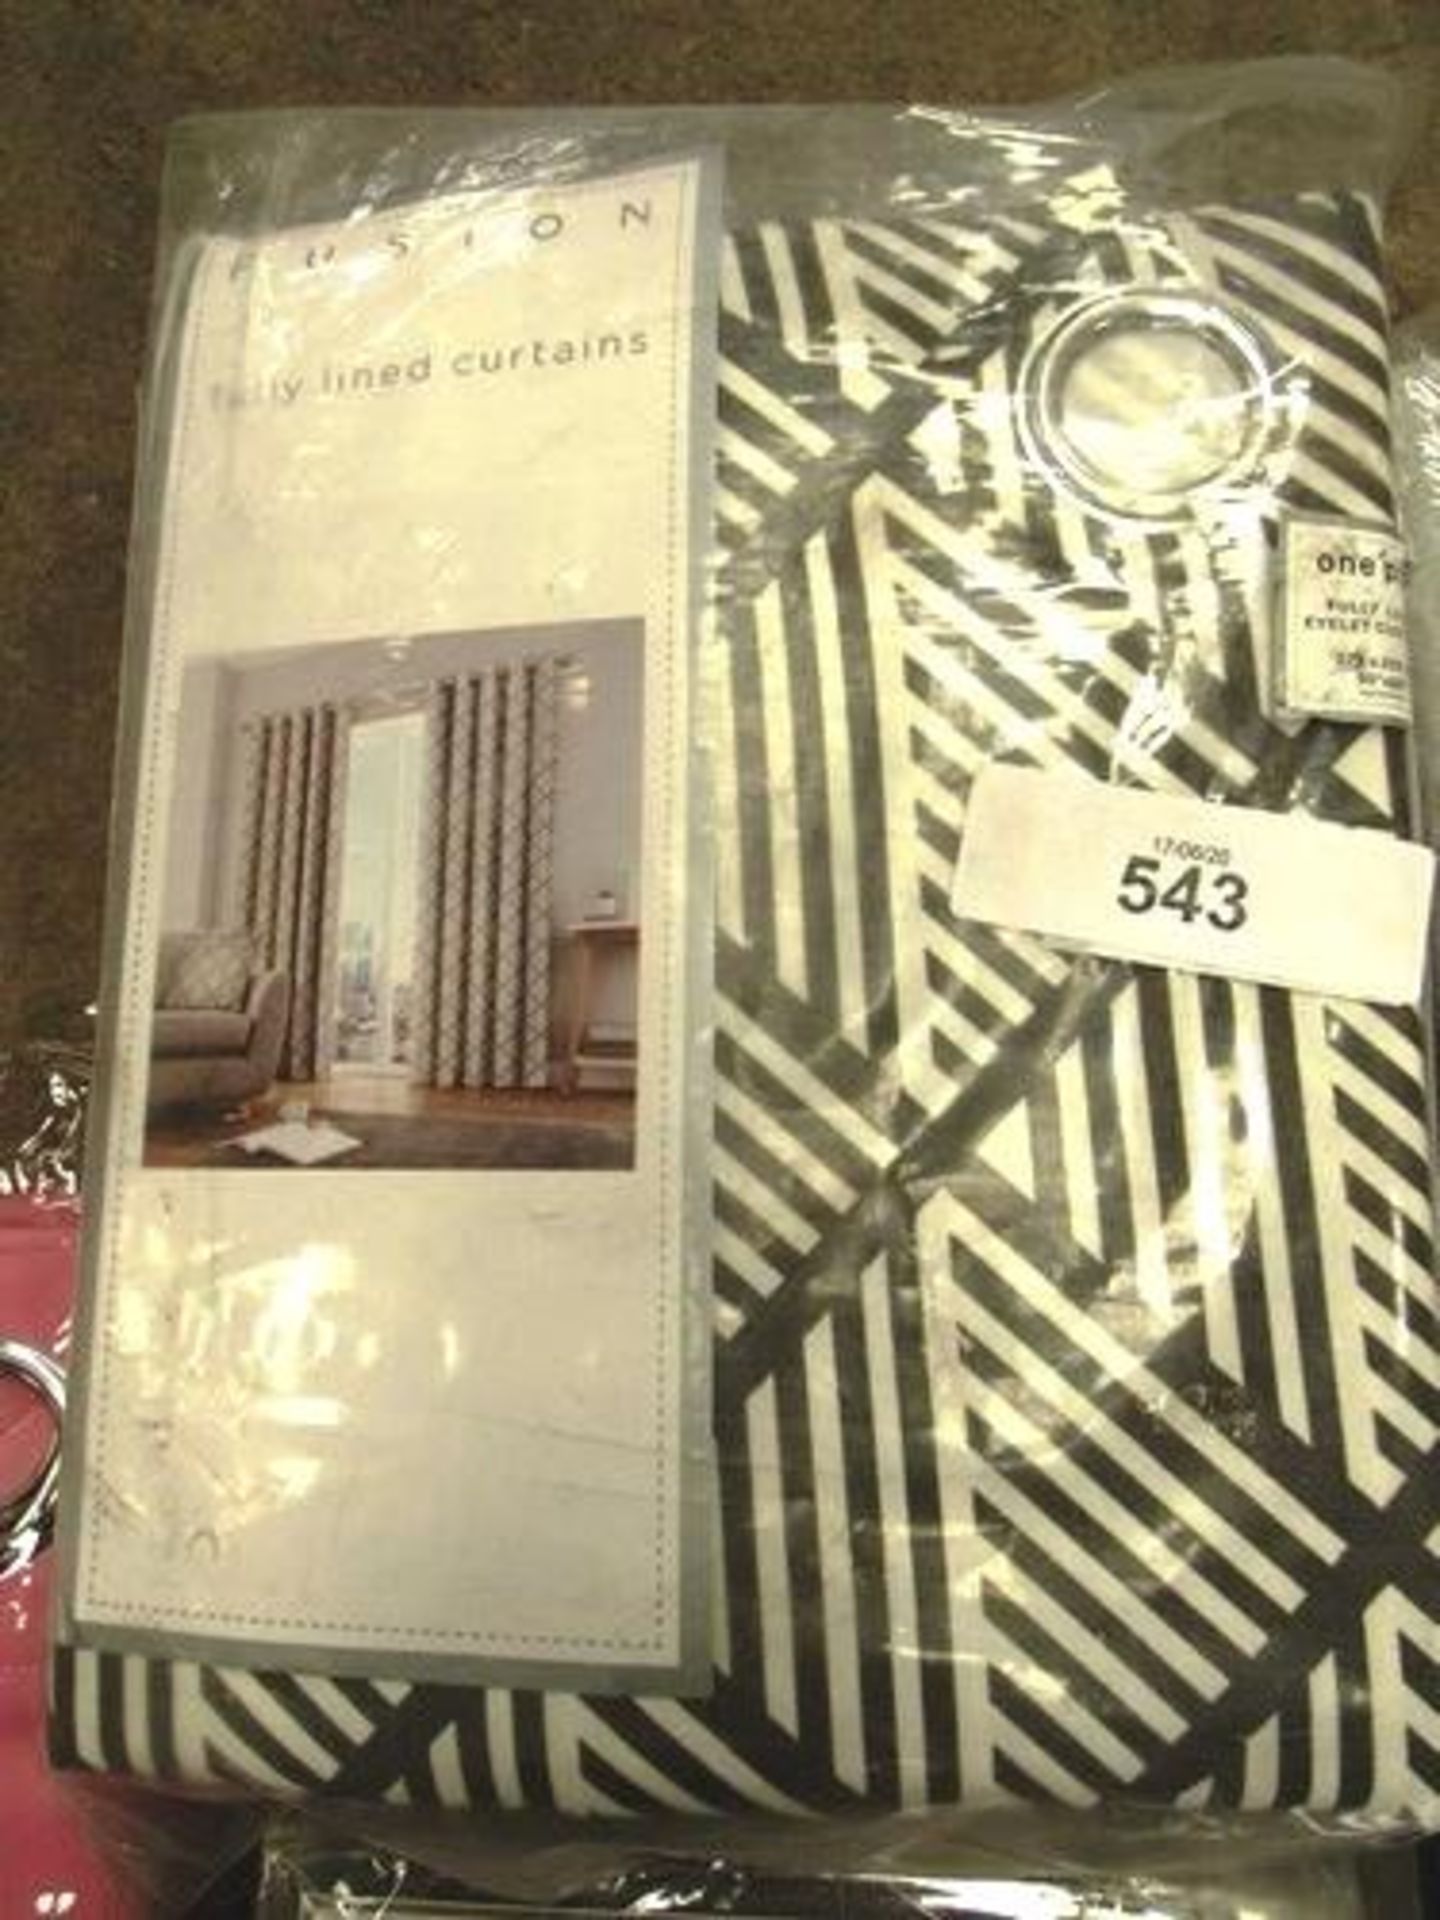 6 x assorted pairs of curtains including 1 x pair of Dunelm Pebble Regan eyelet curtains, size 117 x - Image 5 of 7